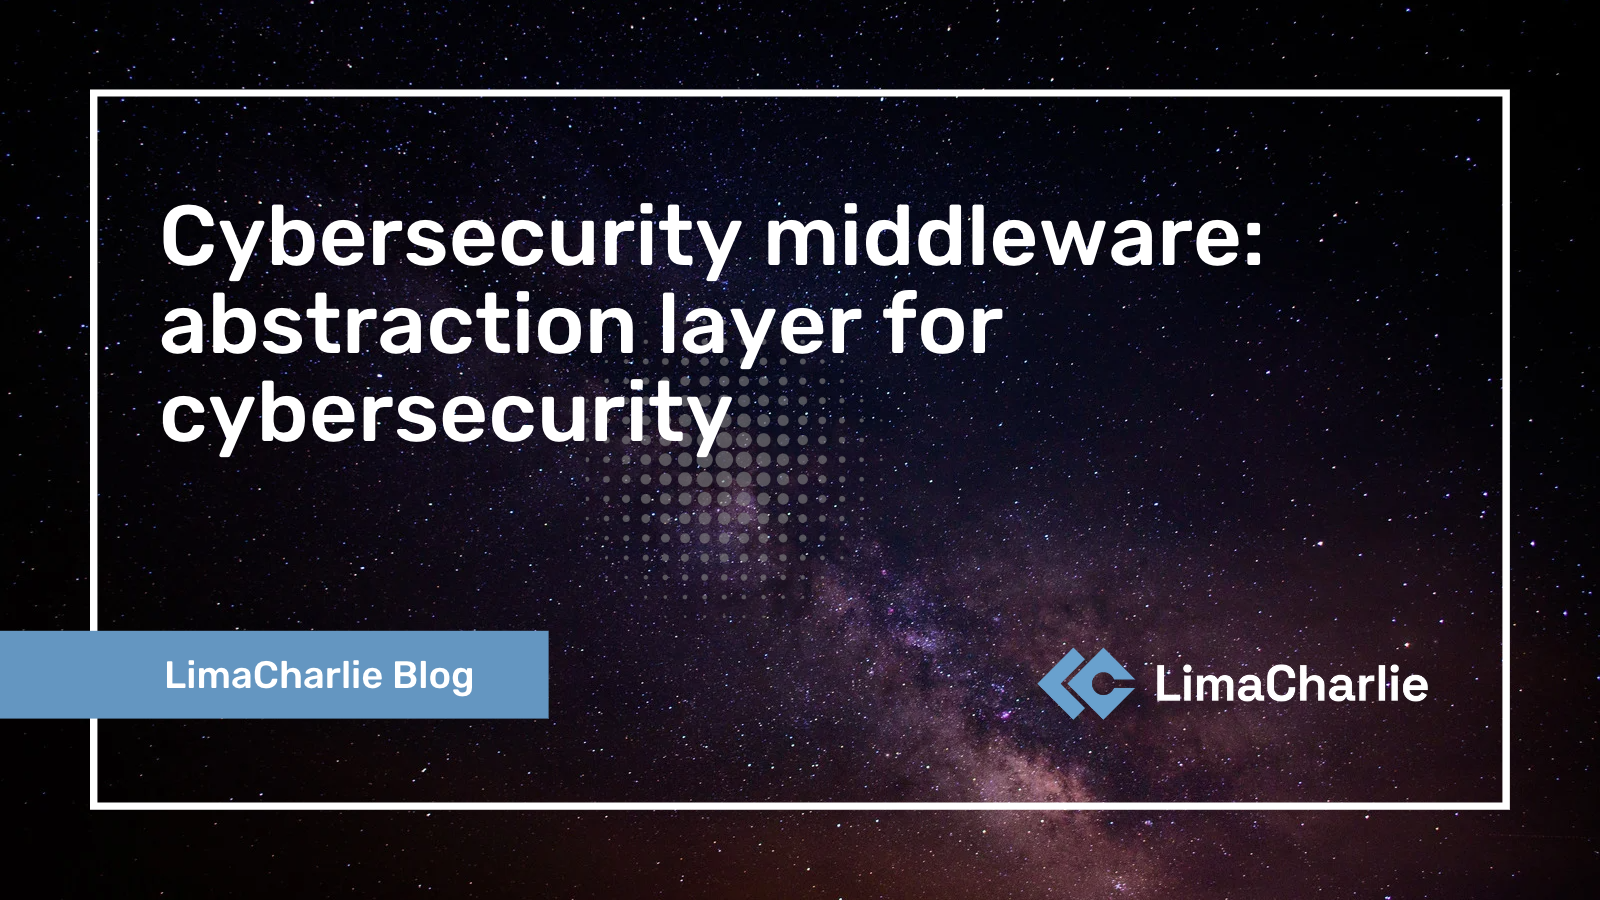 Cybersecurity middleware: abstraction layer for cybersecurity